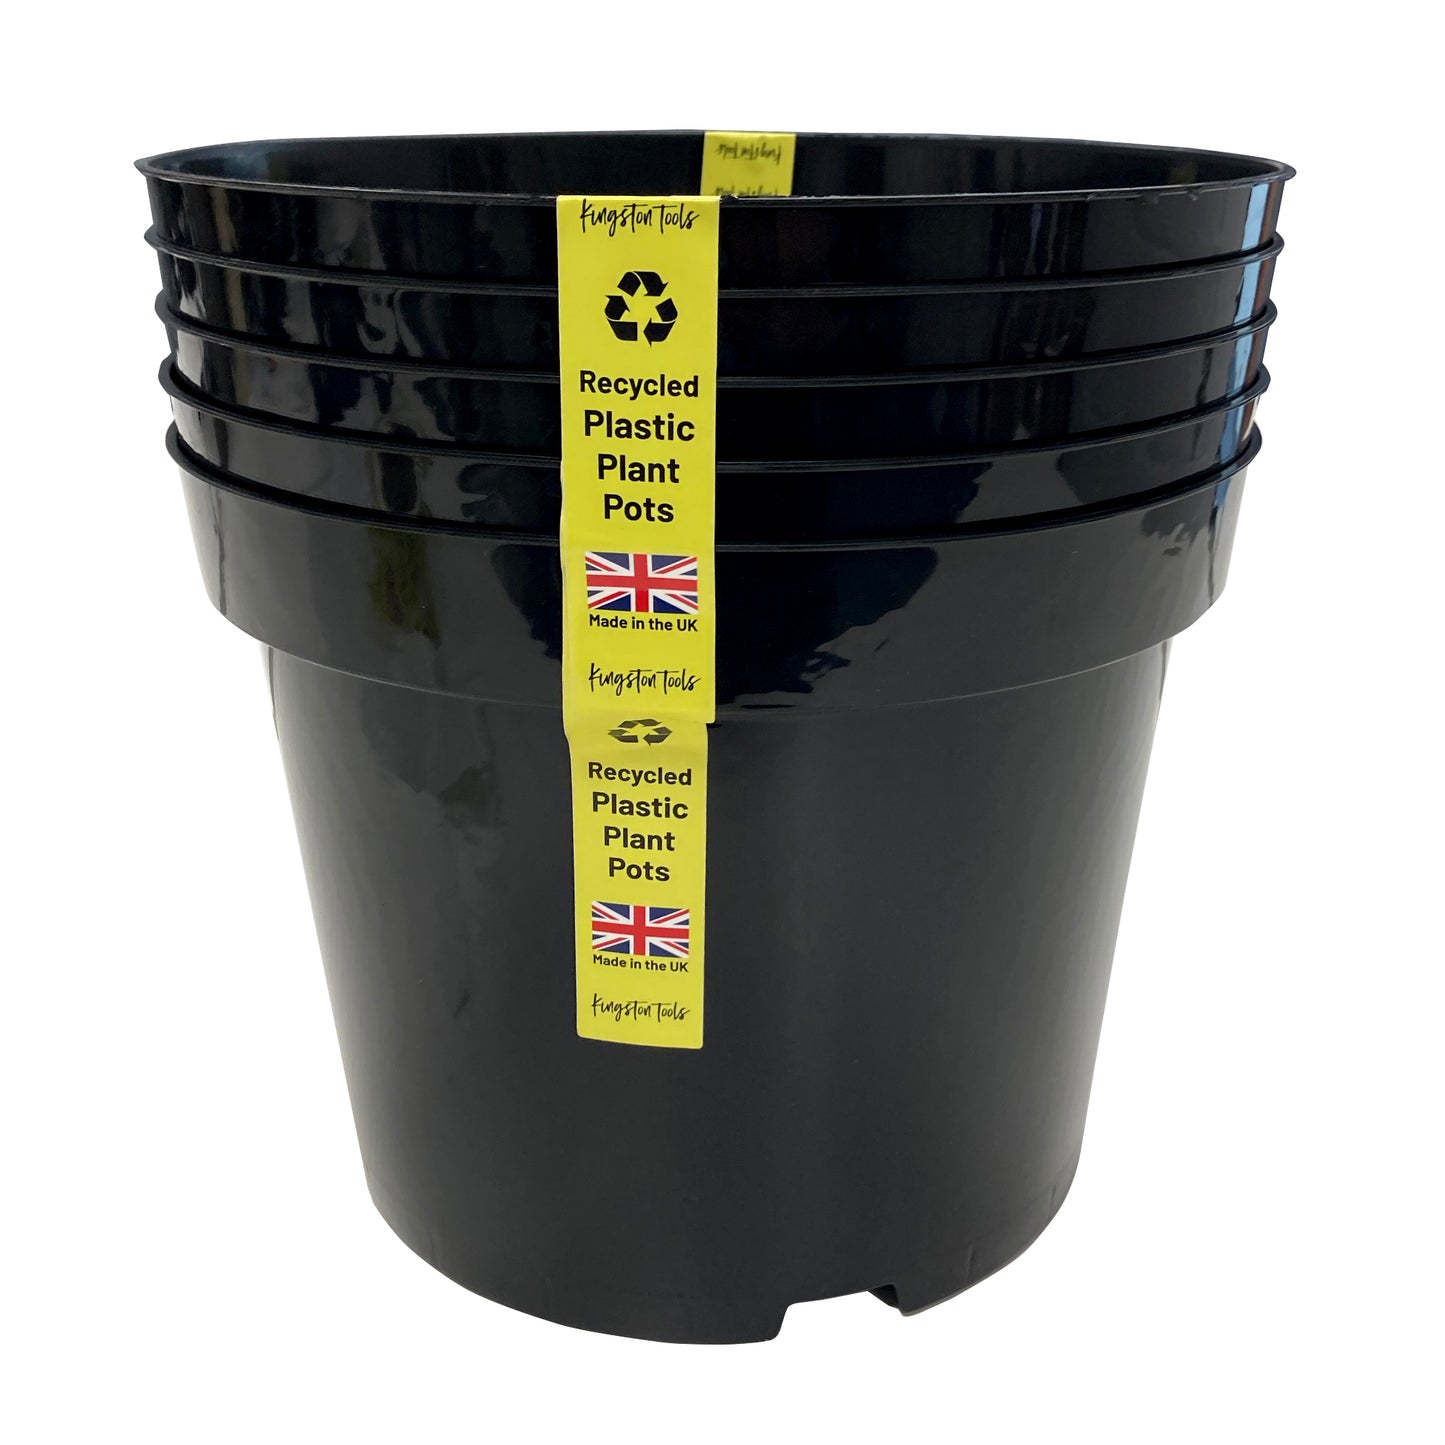 Premium Recycled Plastic Plant Pots High Quality Garden Planters - Black 7 Sizes Available